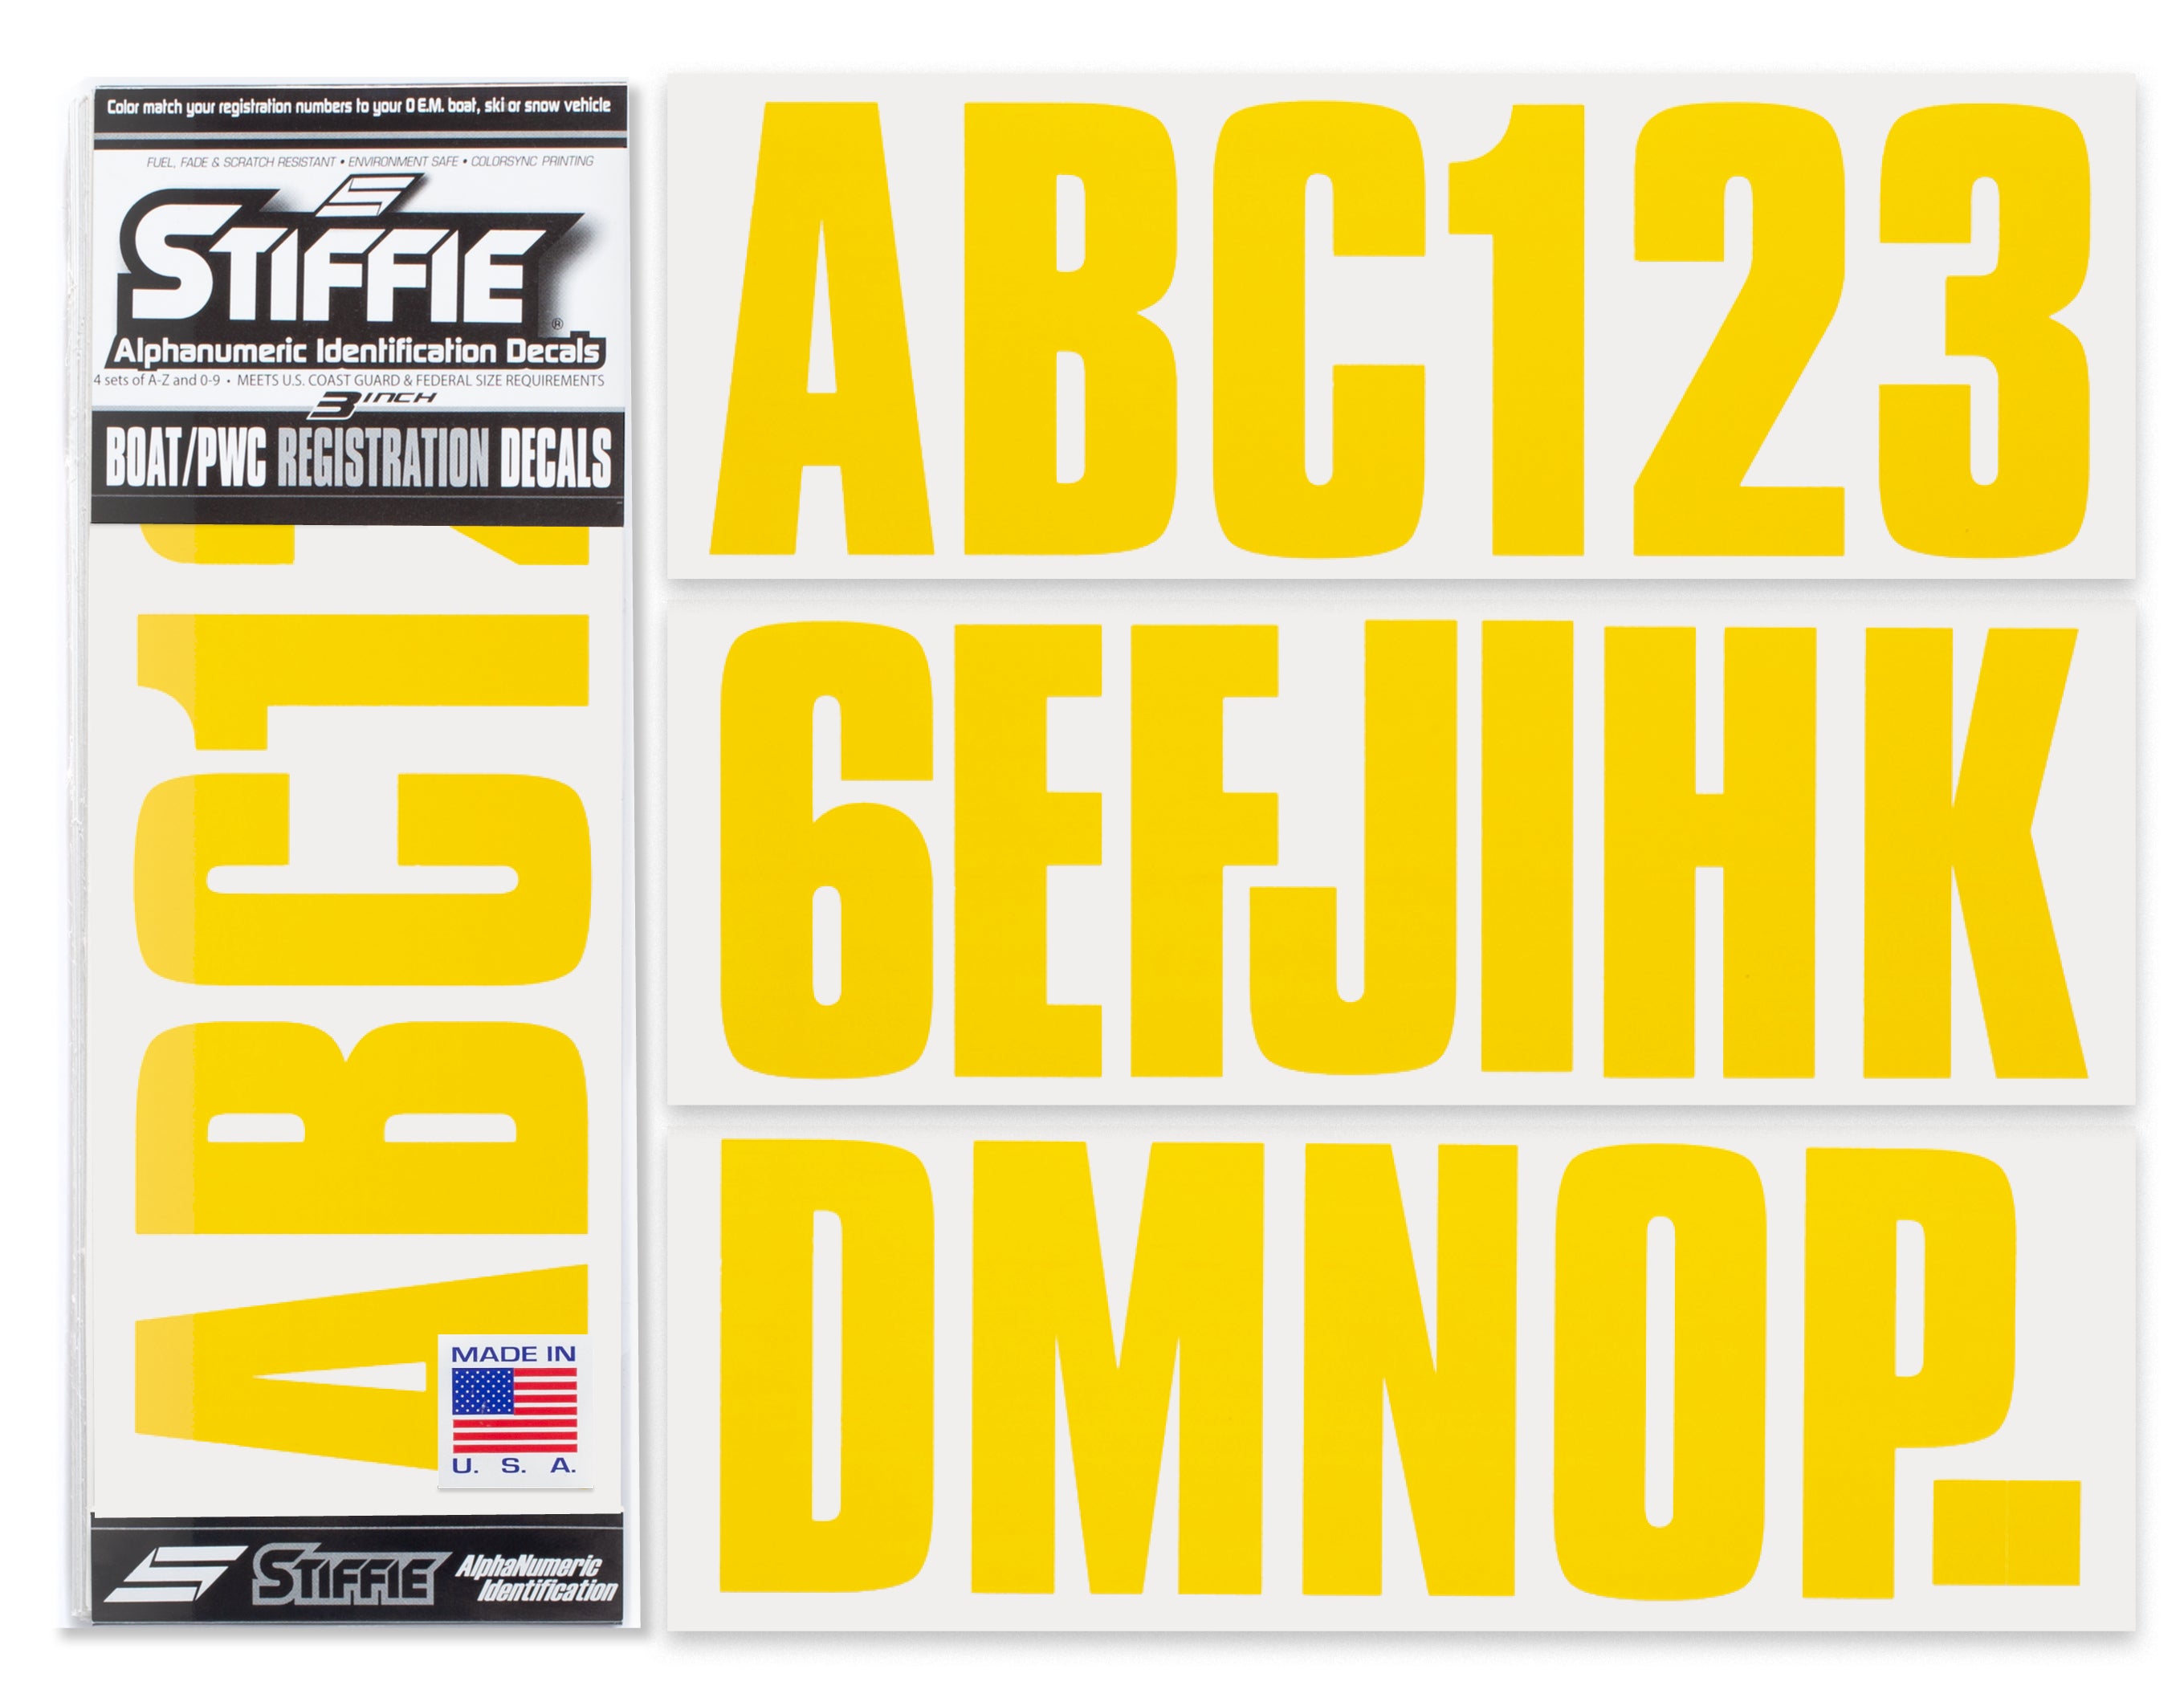 STIFFIE Uniline Yellow 3" ID Kit Alpha-Numeric Registration Identification Numbers Stickers Decals for Boats & Personal Watercraft